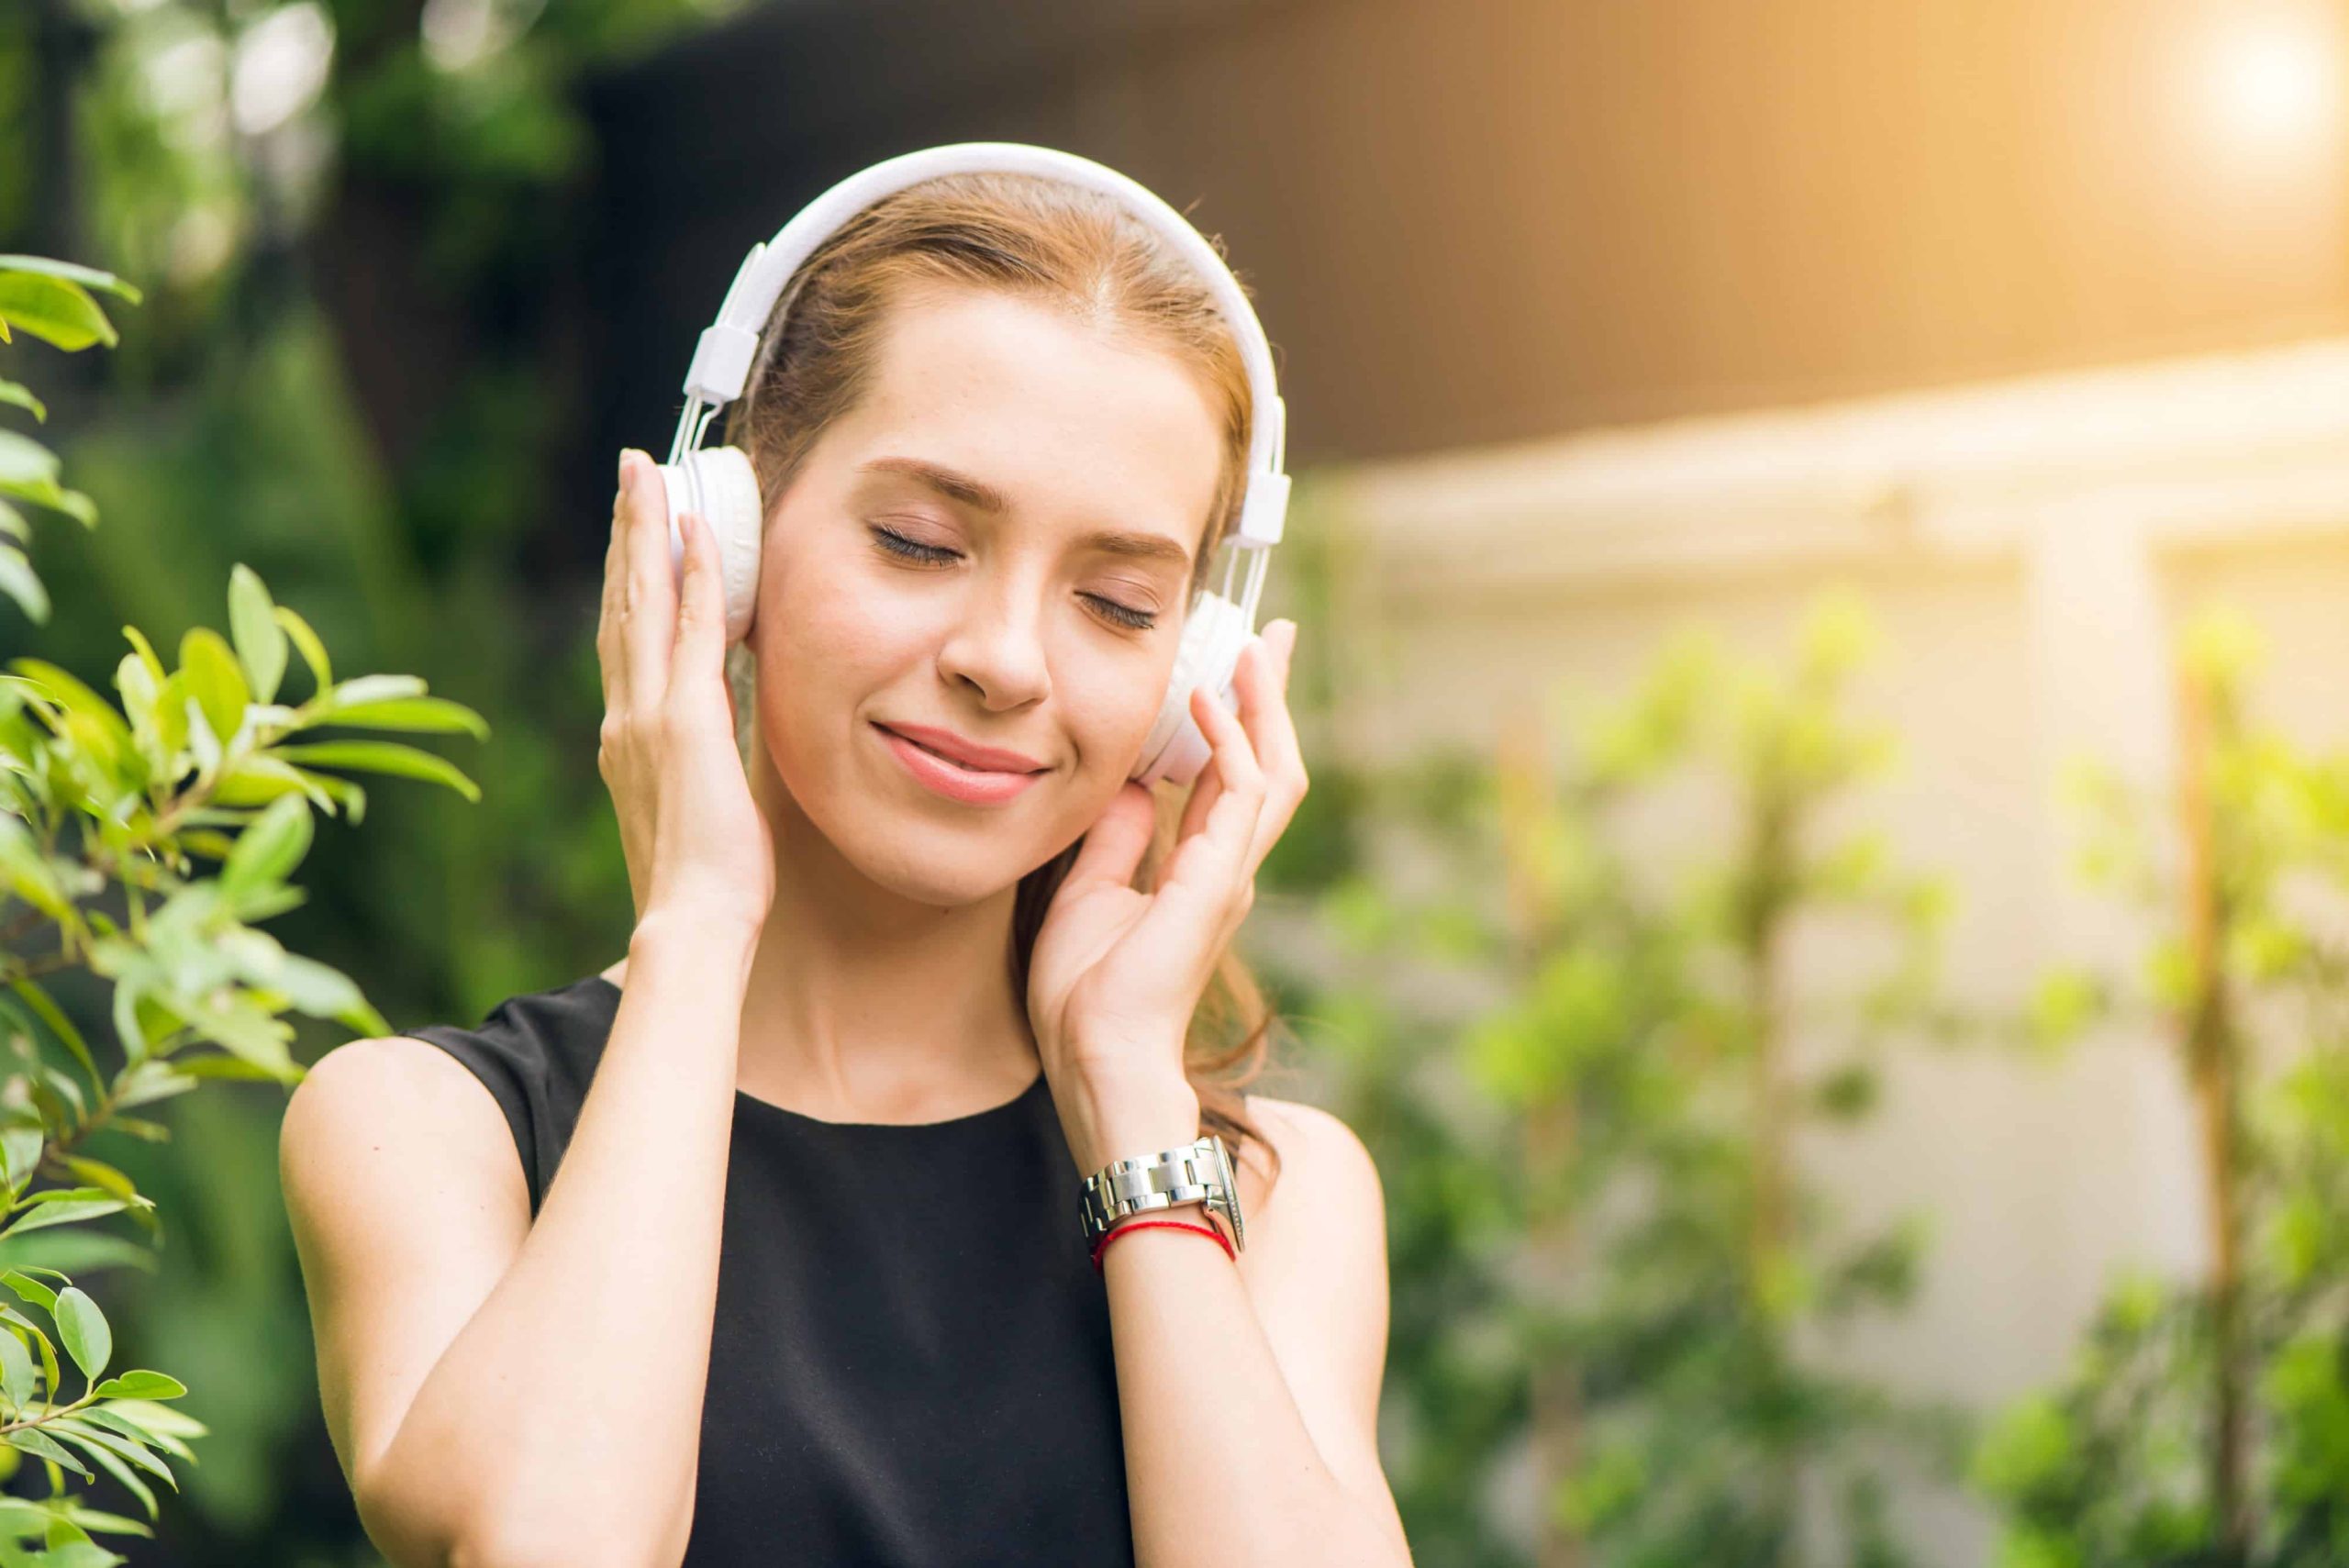 Why Is It Good for Listening to Music?